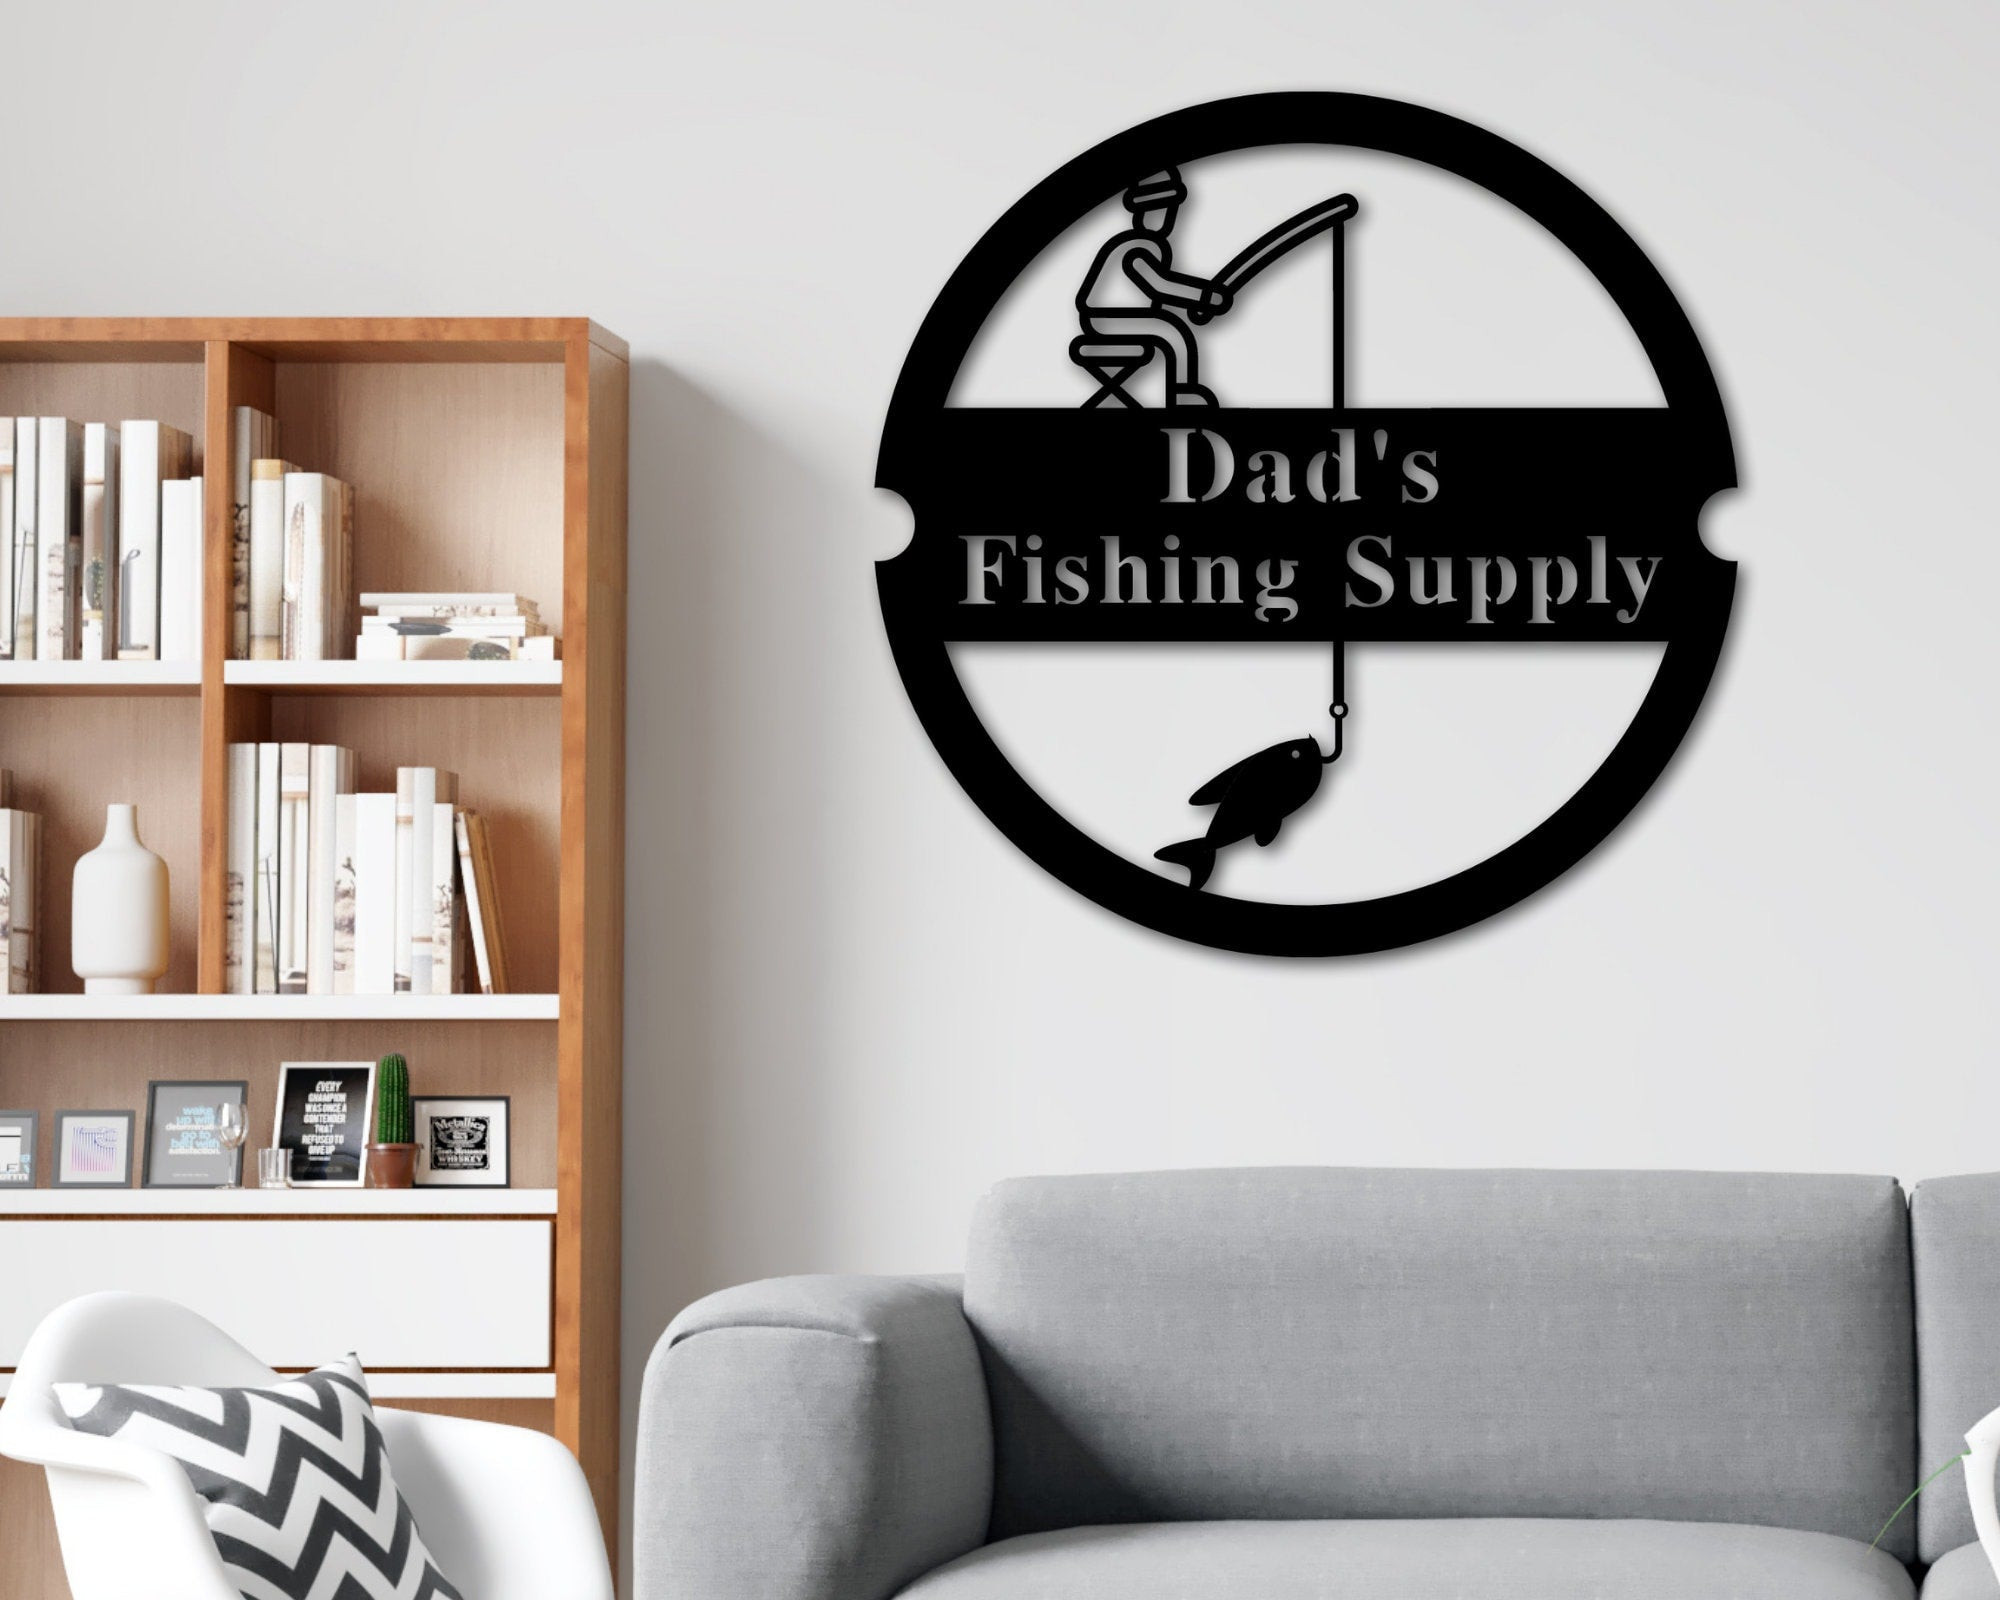 Fishing Metal Sign, Custom Fishing Decor, Personalized Father's Day Gift, Bass Fishing Gift, Gift For Dad, Fisherman Gift, Fishing Supply Laser Cut Metal Signs Custom Gift Ideas 14x14IN